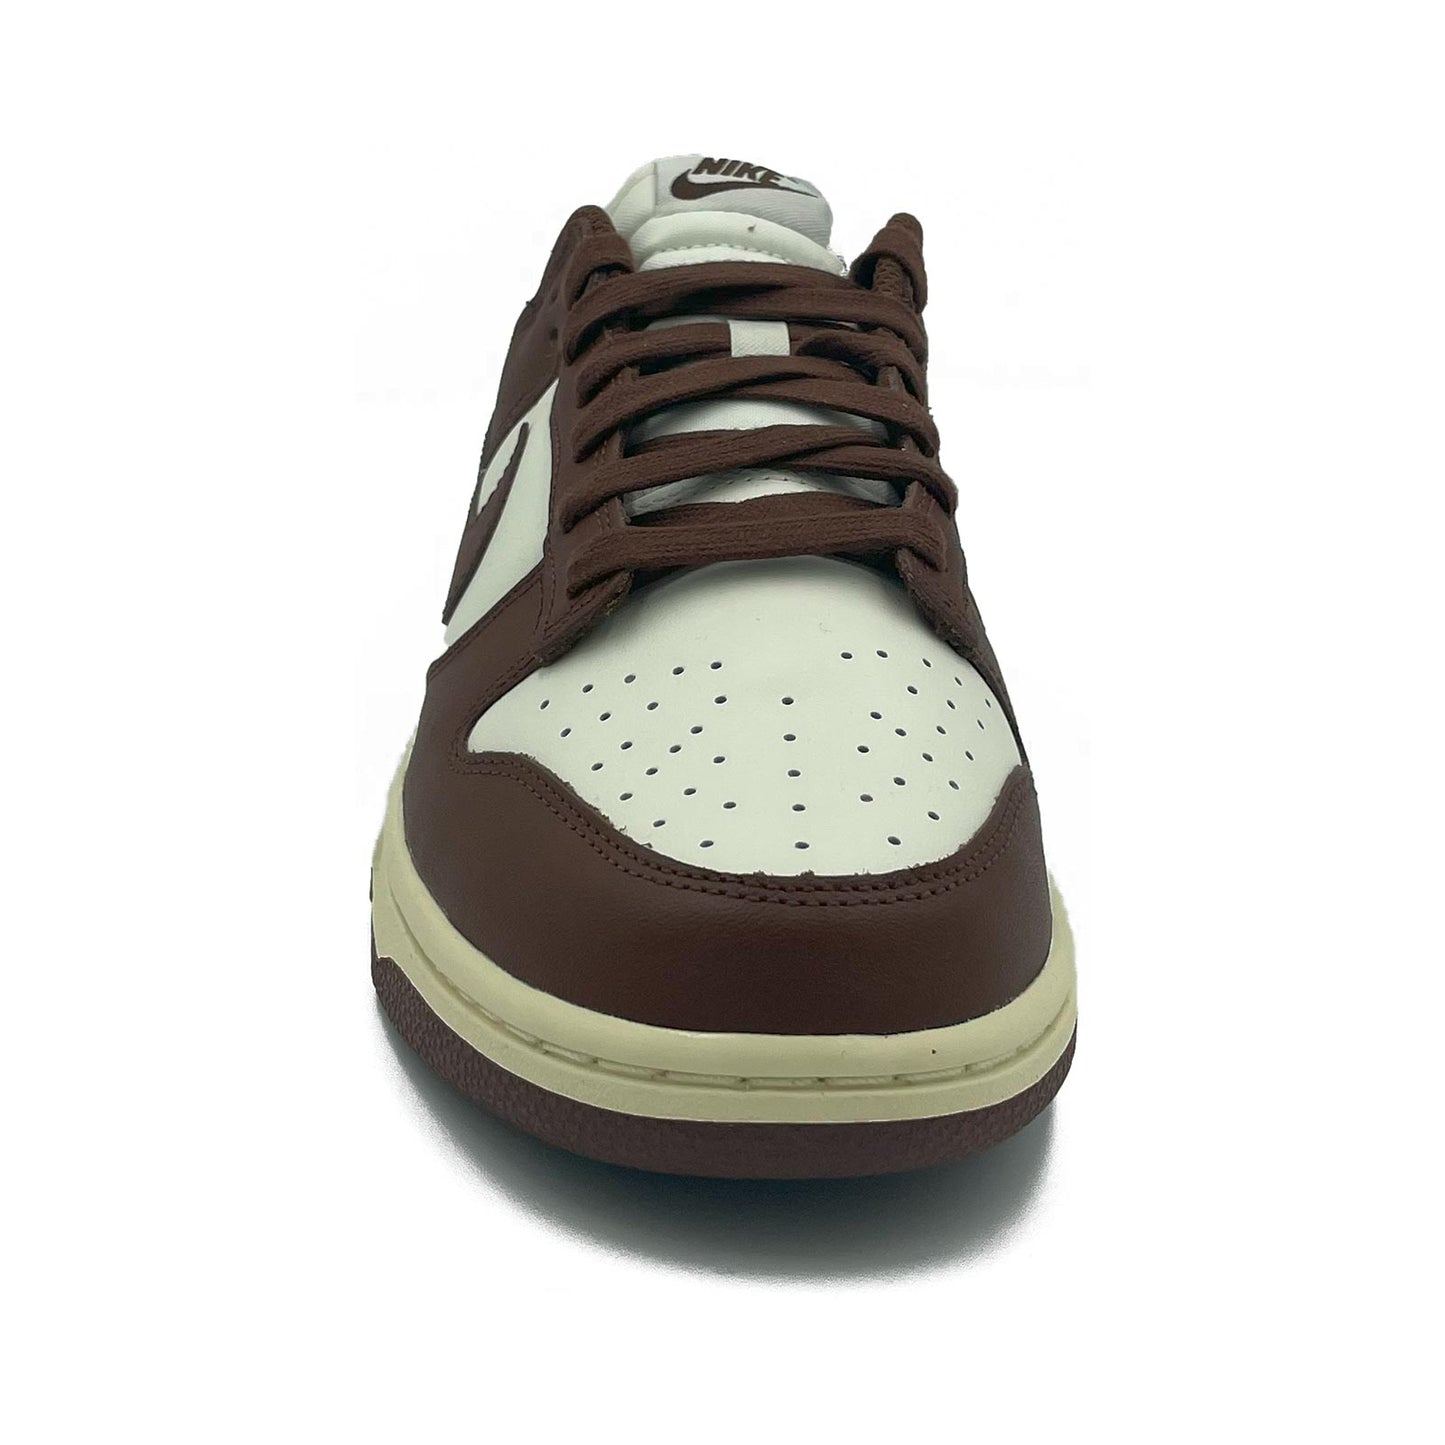 Women's nike poisons Dunk Low, Cacao Wow